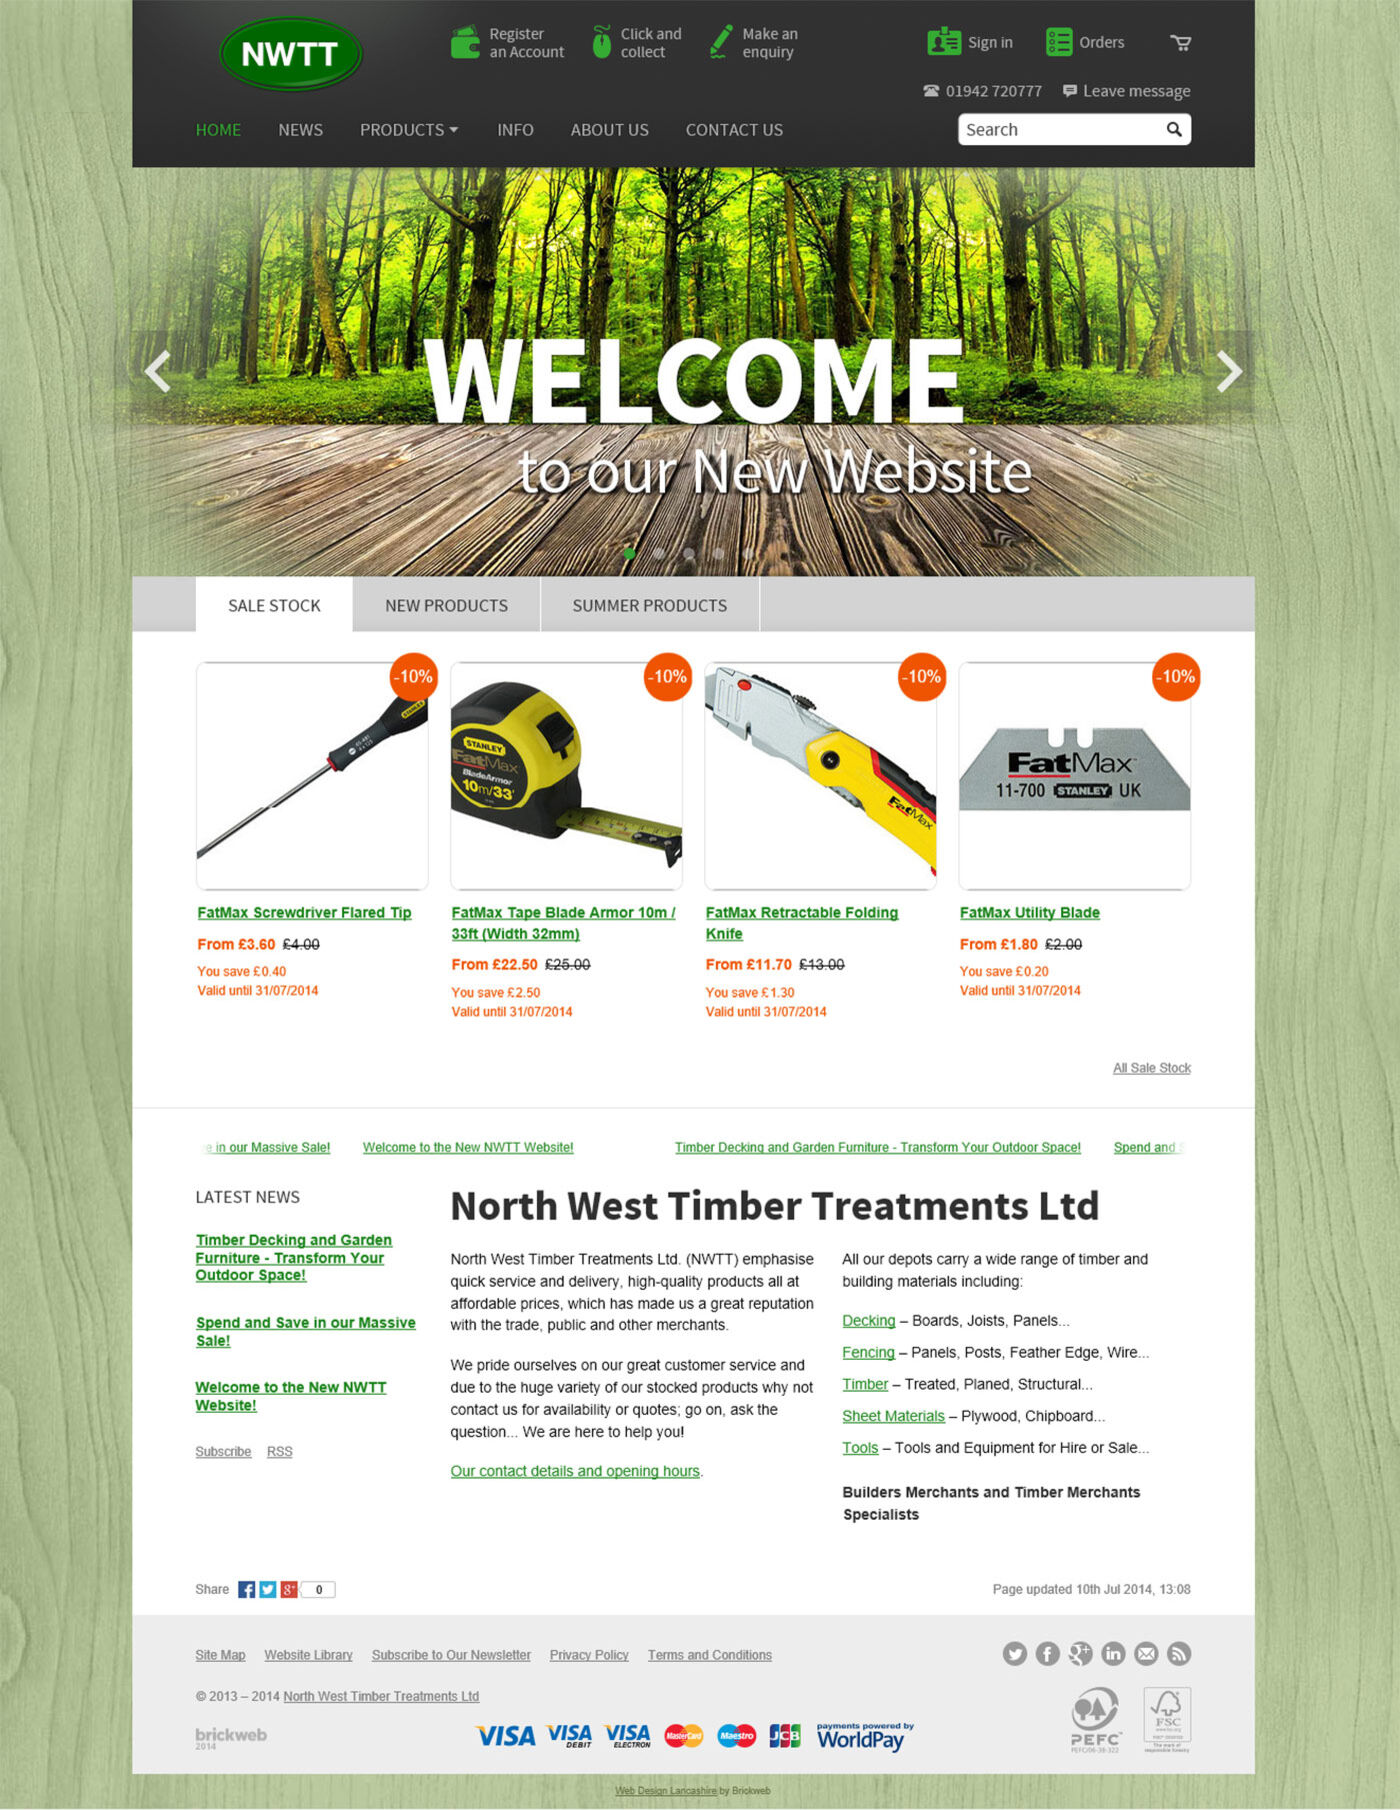 NWTT (2014) Home page